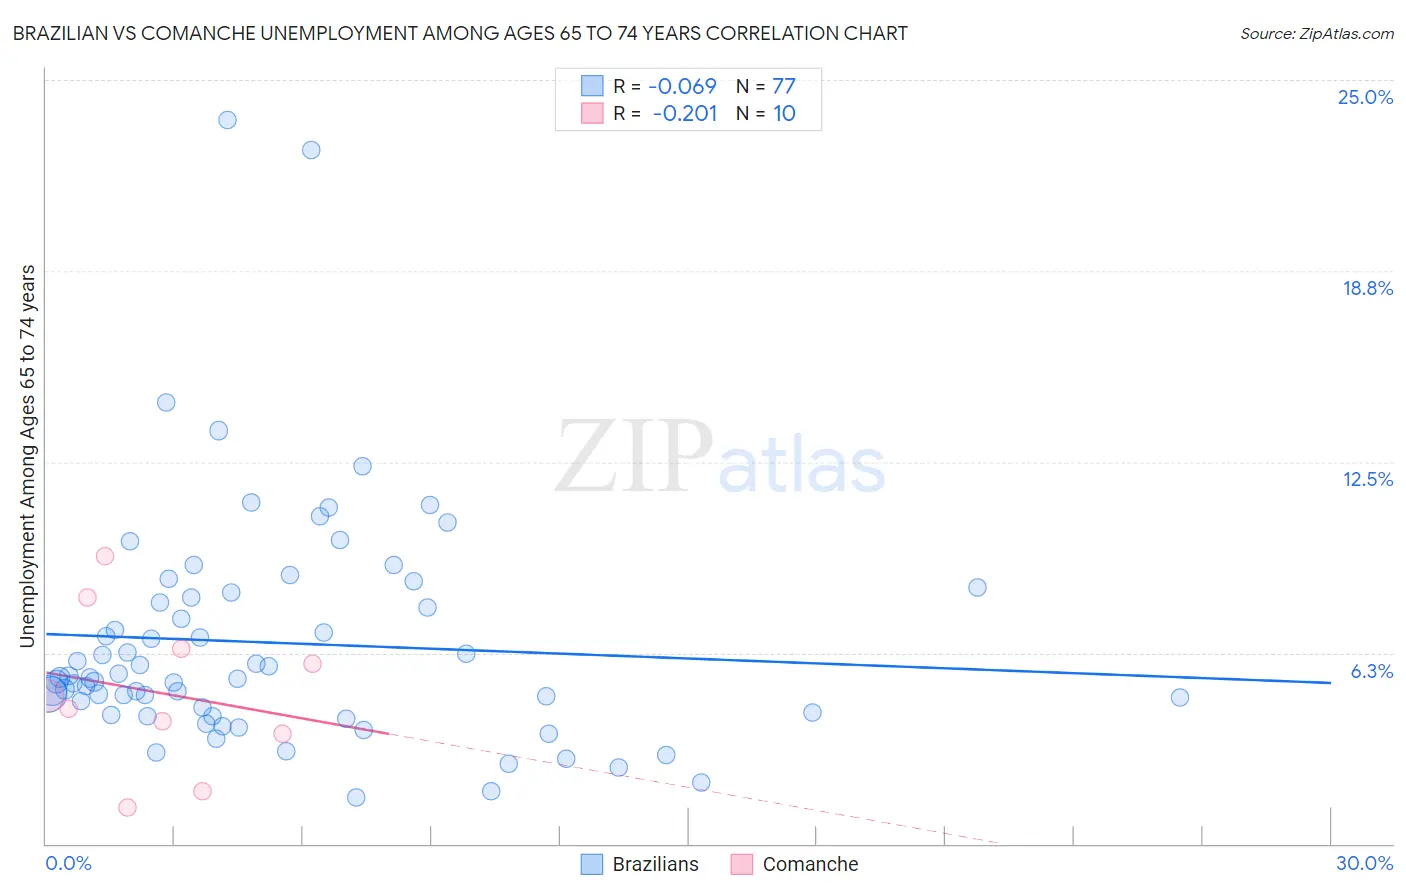 Brazilian vs Comanche Unemployment Among Ages 65 to 74 years